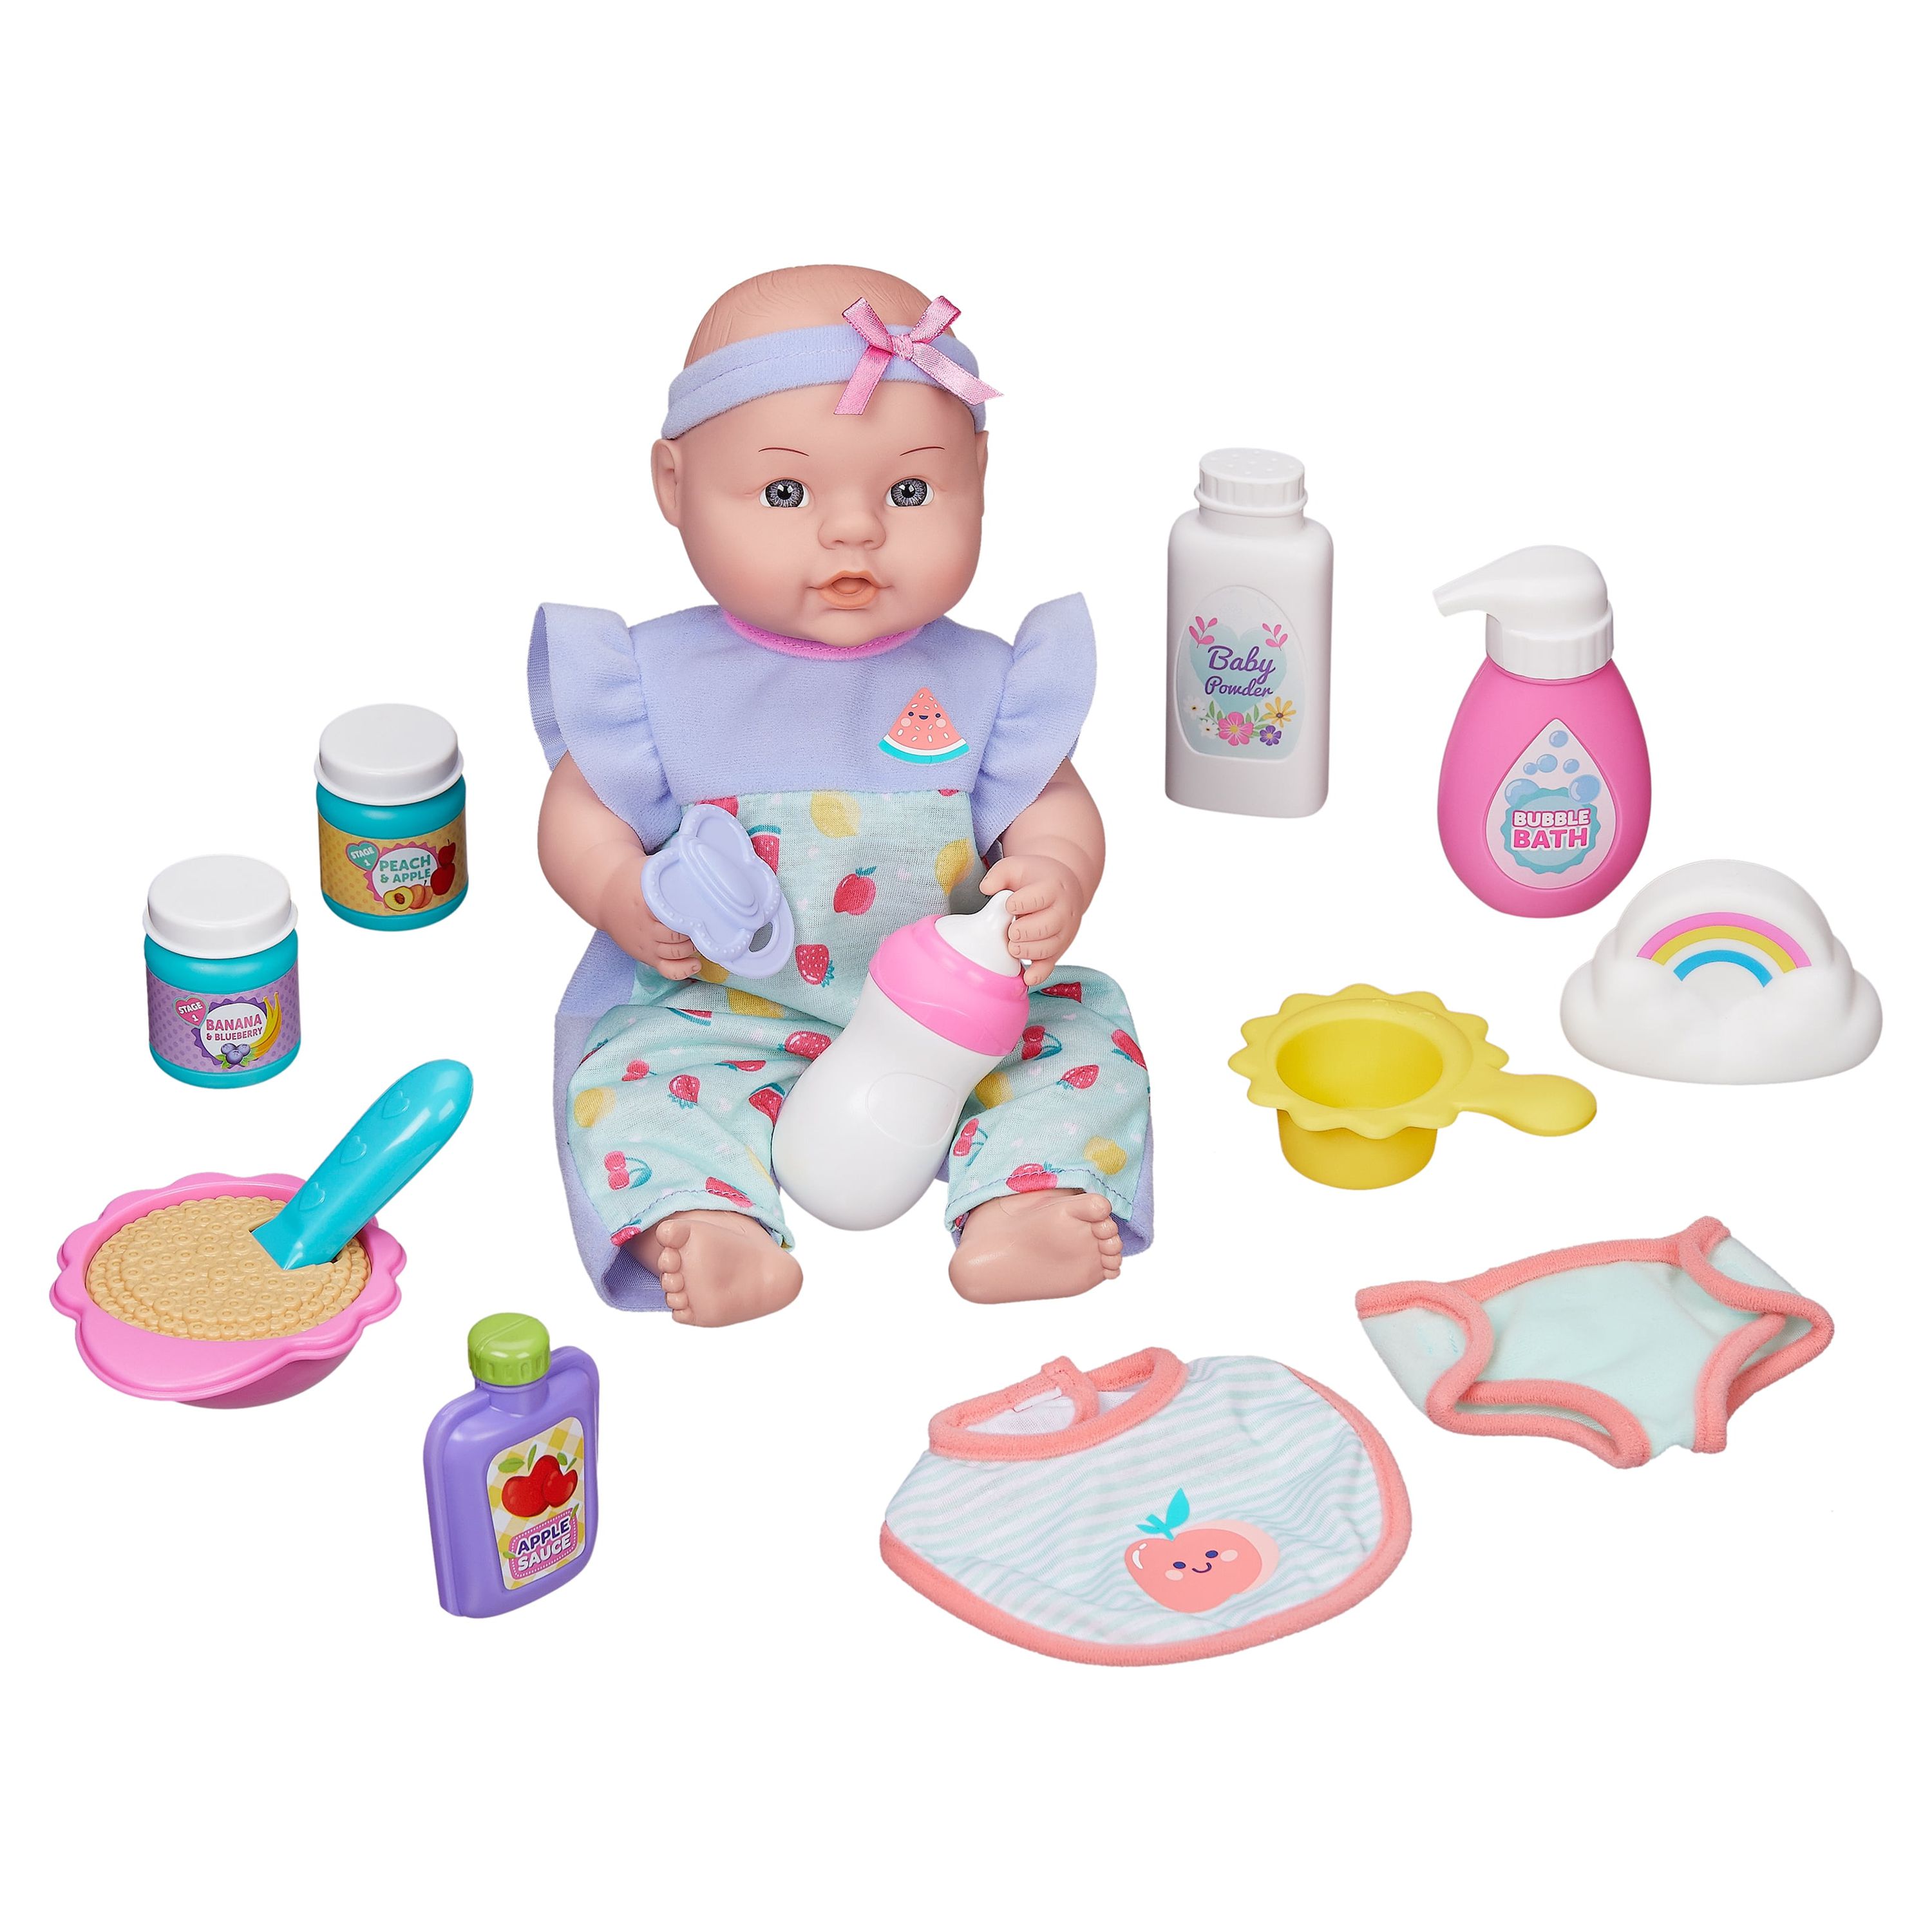 My Sweet Love 12.5" Play with Me Play Set, 16 Pieces Included - image 1 of 5